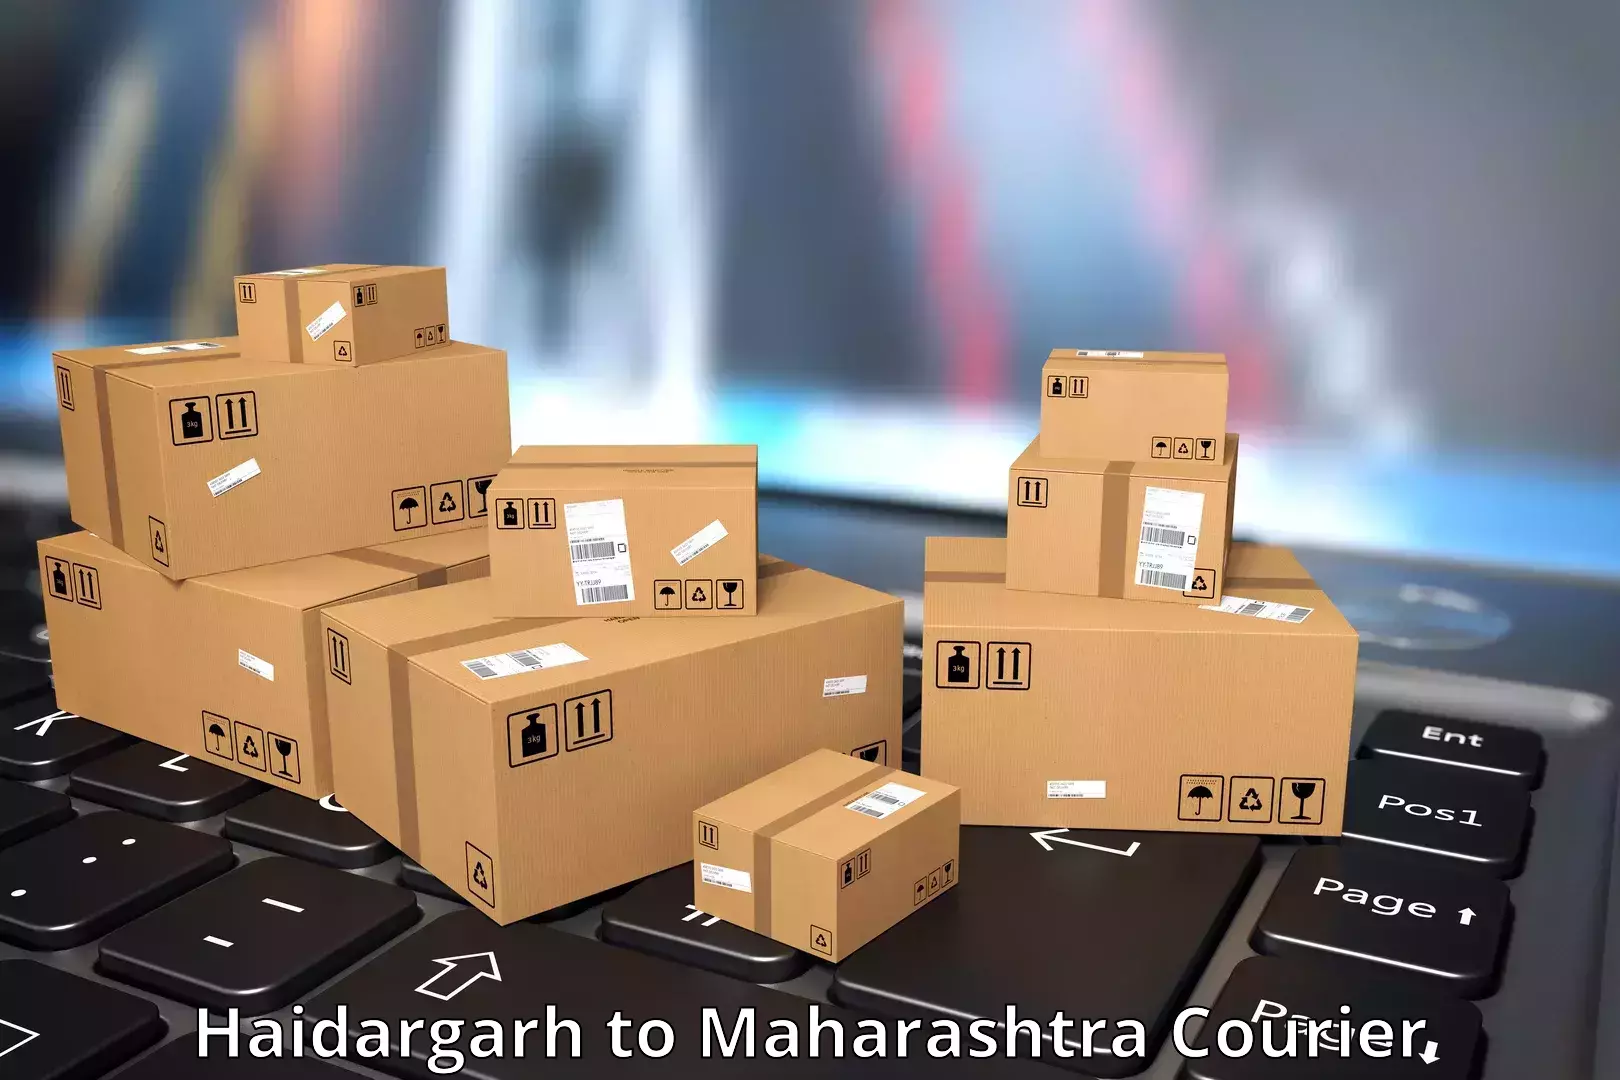 Flexible delivery schedules Haidargarh to Mahabaleshwar